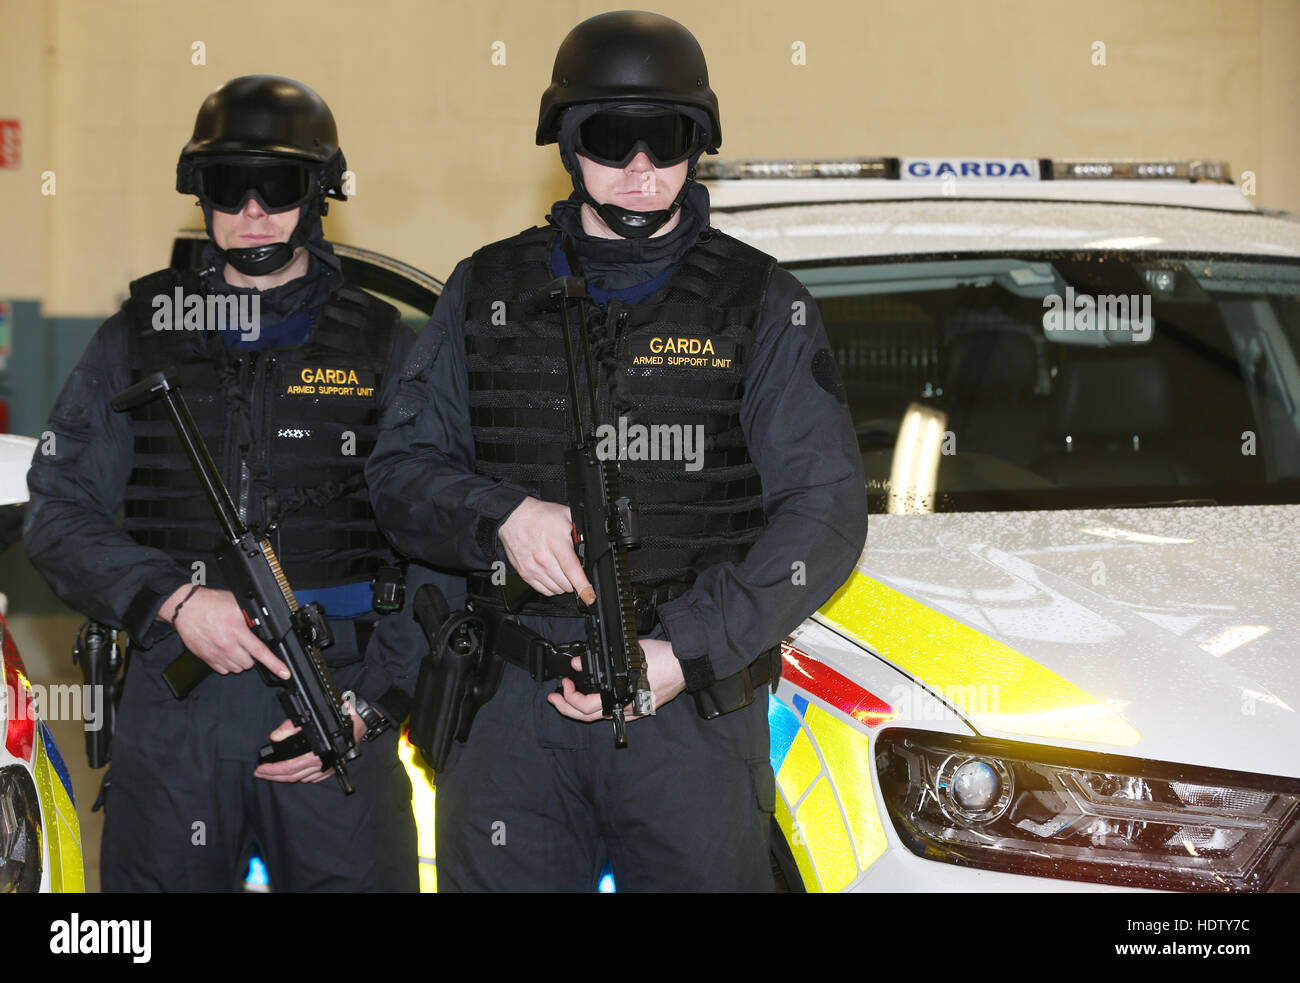 Officers display their new cars and equipment as An Garda Siochana launches a new Armed Support Unit (ASU) for the Dublin region at Garda Head Quarters in Dublin. Stock Photo